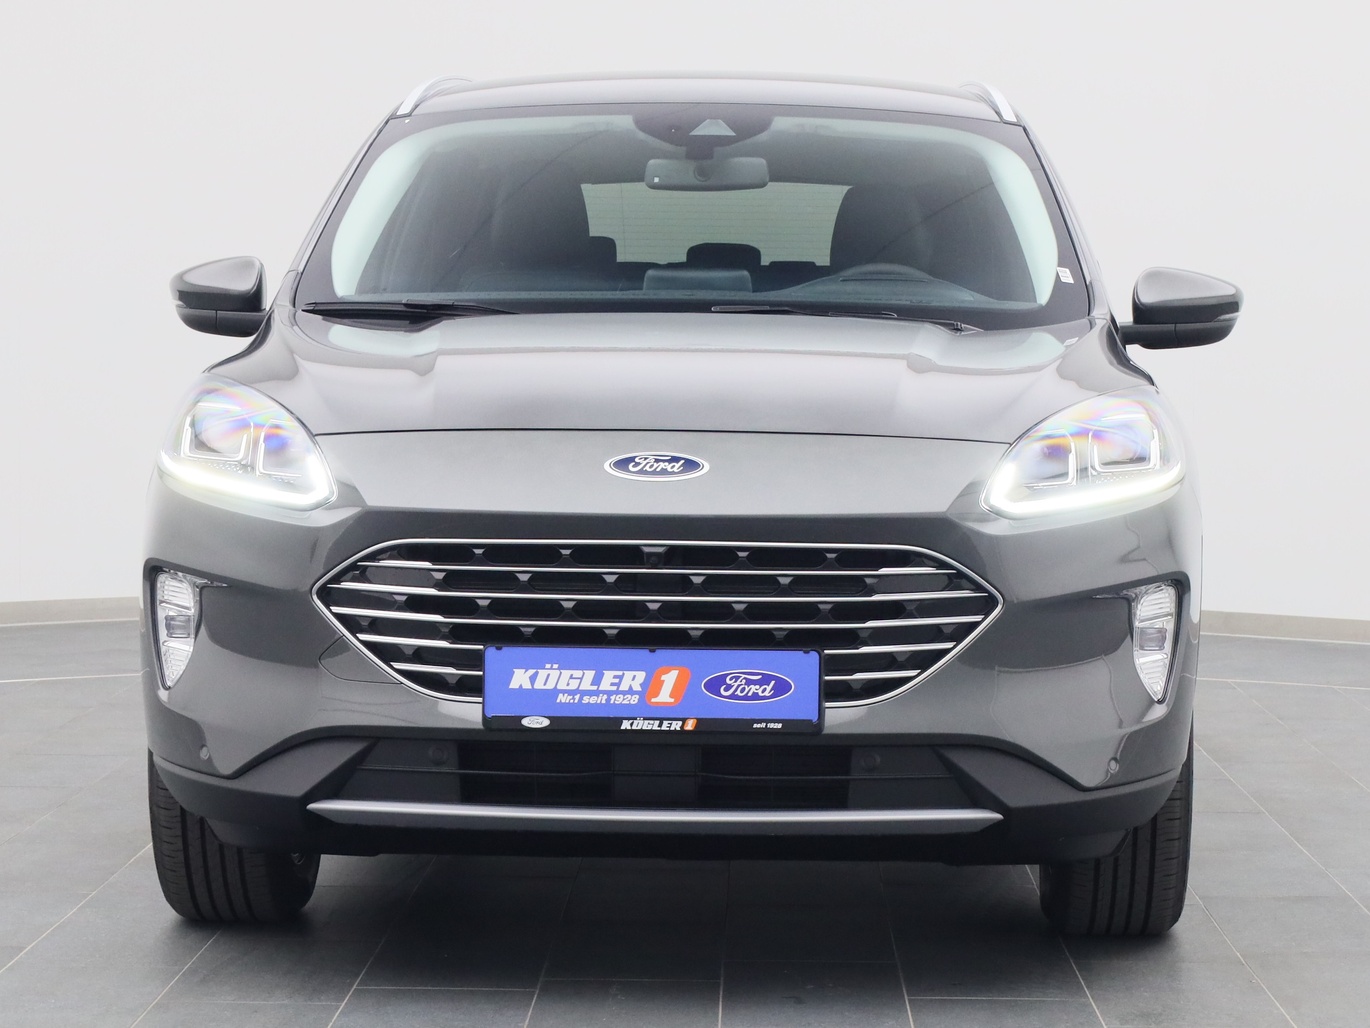 Frontansicht eines Ford Kuga Titanium X 225PS Plug-in-Hybrid Aut. in Magnetic Grau 